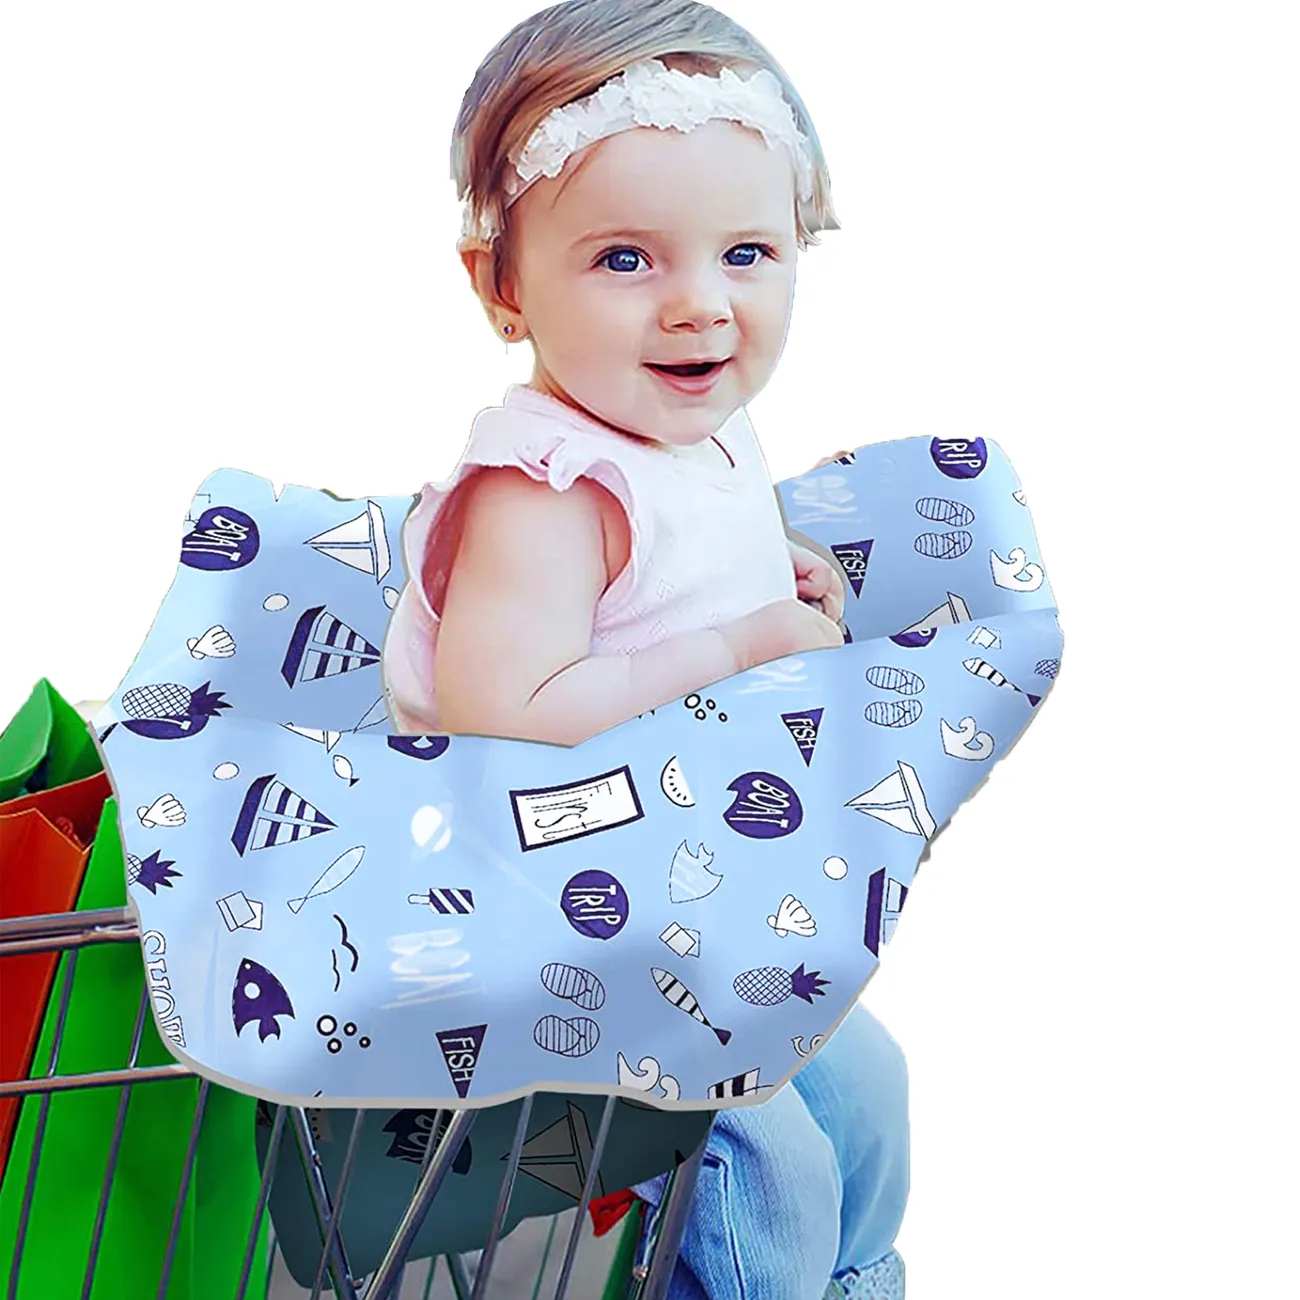 Shopping Cart Cover for Baby, High Chair Cover, Cart Cover for Babies,  Kids& Toddlers, Portable 2-in-1 Design, Includes Free Carry Bag for Market  and Resturant Use Only $11.99 PatPat US Mobile